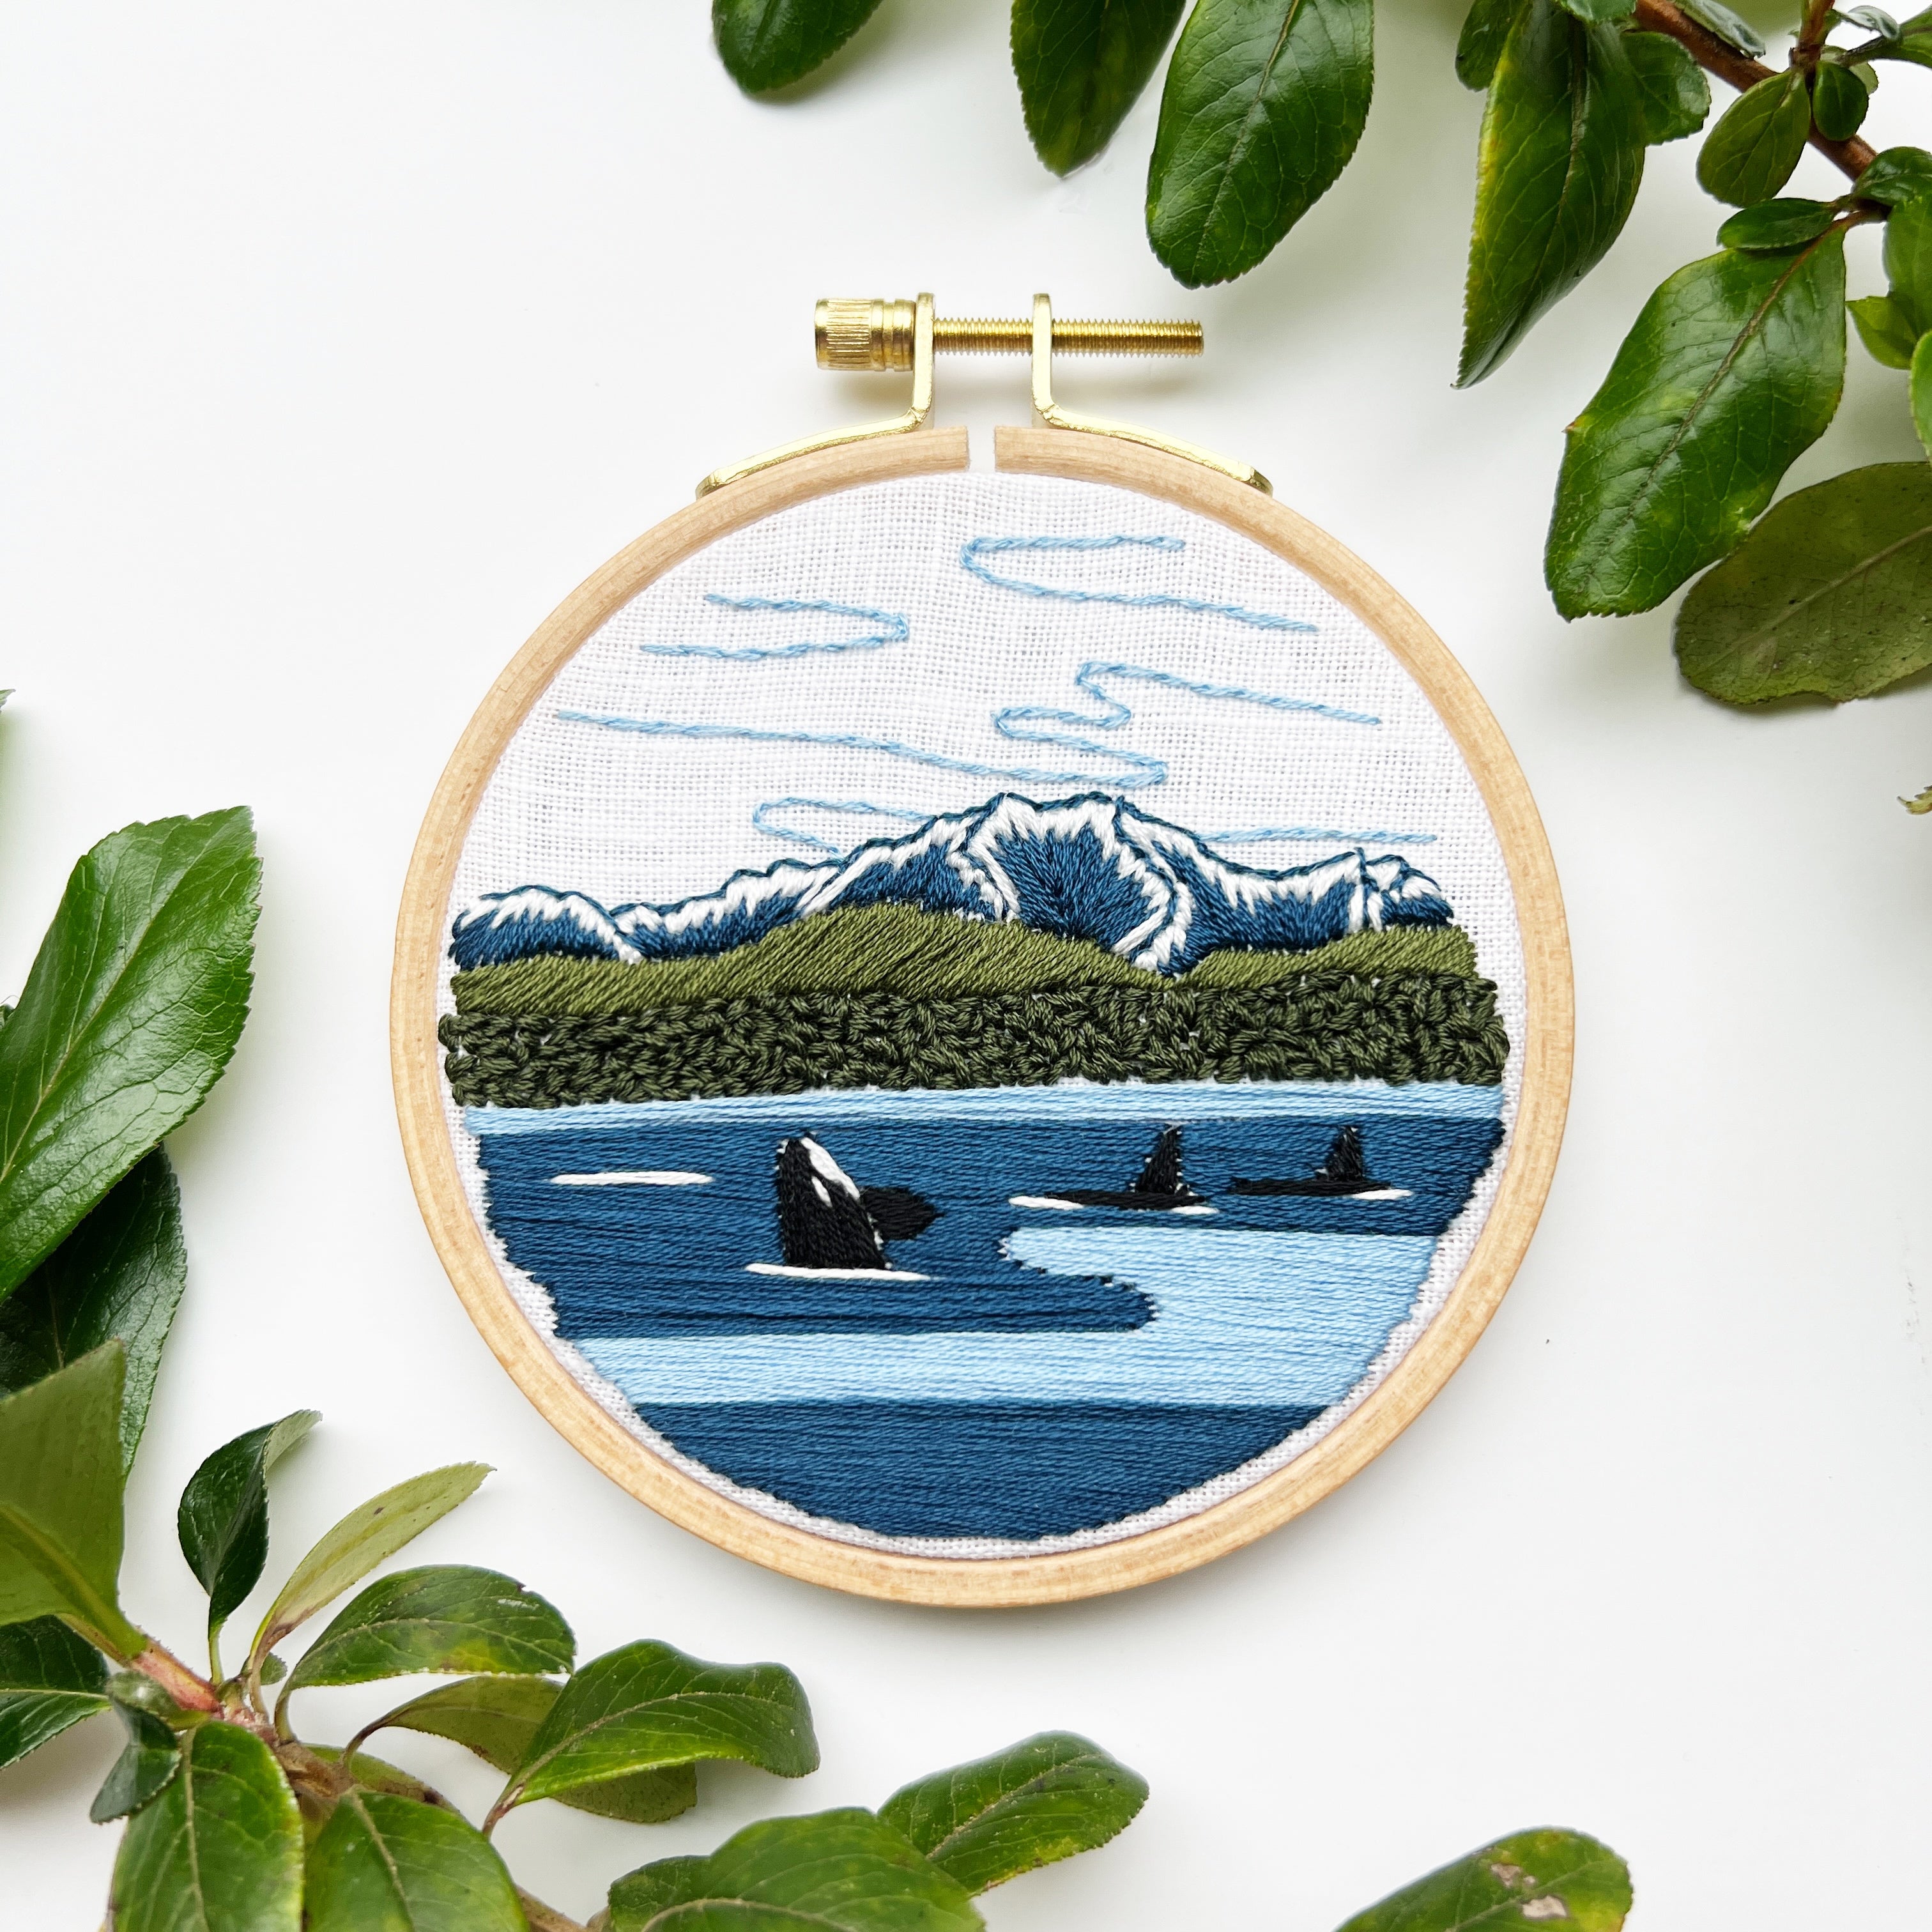 Orcas in the Sounds - Beginning Embroidery Class